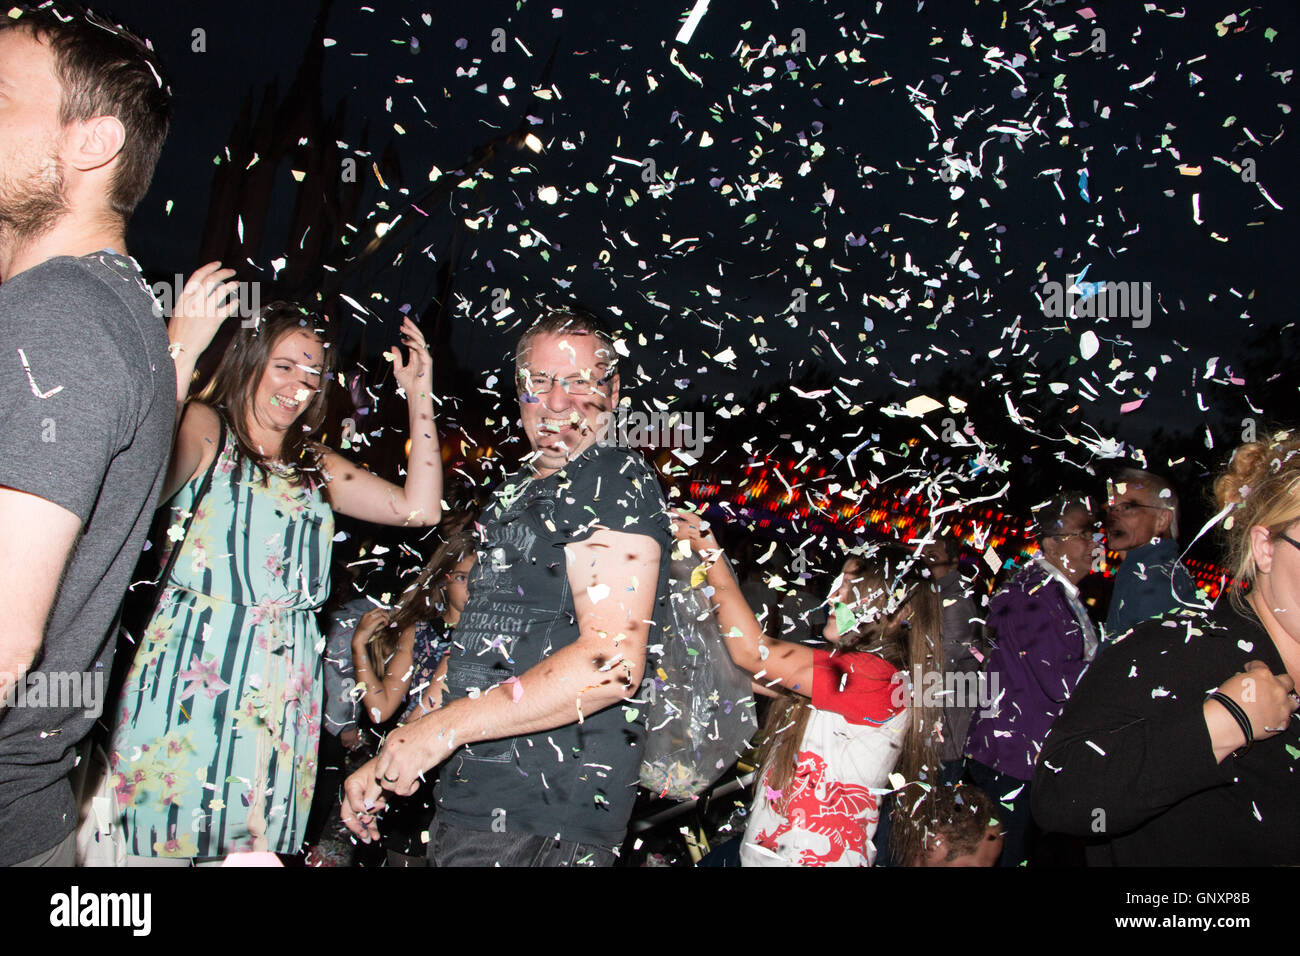 Devizes Wiltshire, UK. 31st Aug, 2016. People throwing confetti during the annual confetti battle event. Confetti is fired over the crowd gathered in the market square and supplies are also available for throwing around. Now part of the Devizes International Street Festival the tradition has been a part of the annual Devizes Street Carnival celebrations since 1955 and stems from the former practice of throwing rose petals at carnival floats. Credit:  Paul Francis/Alamy Live News Stock Photo